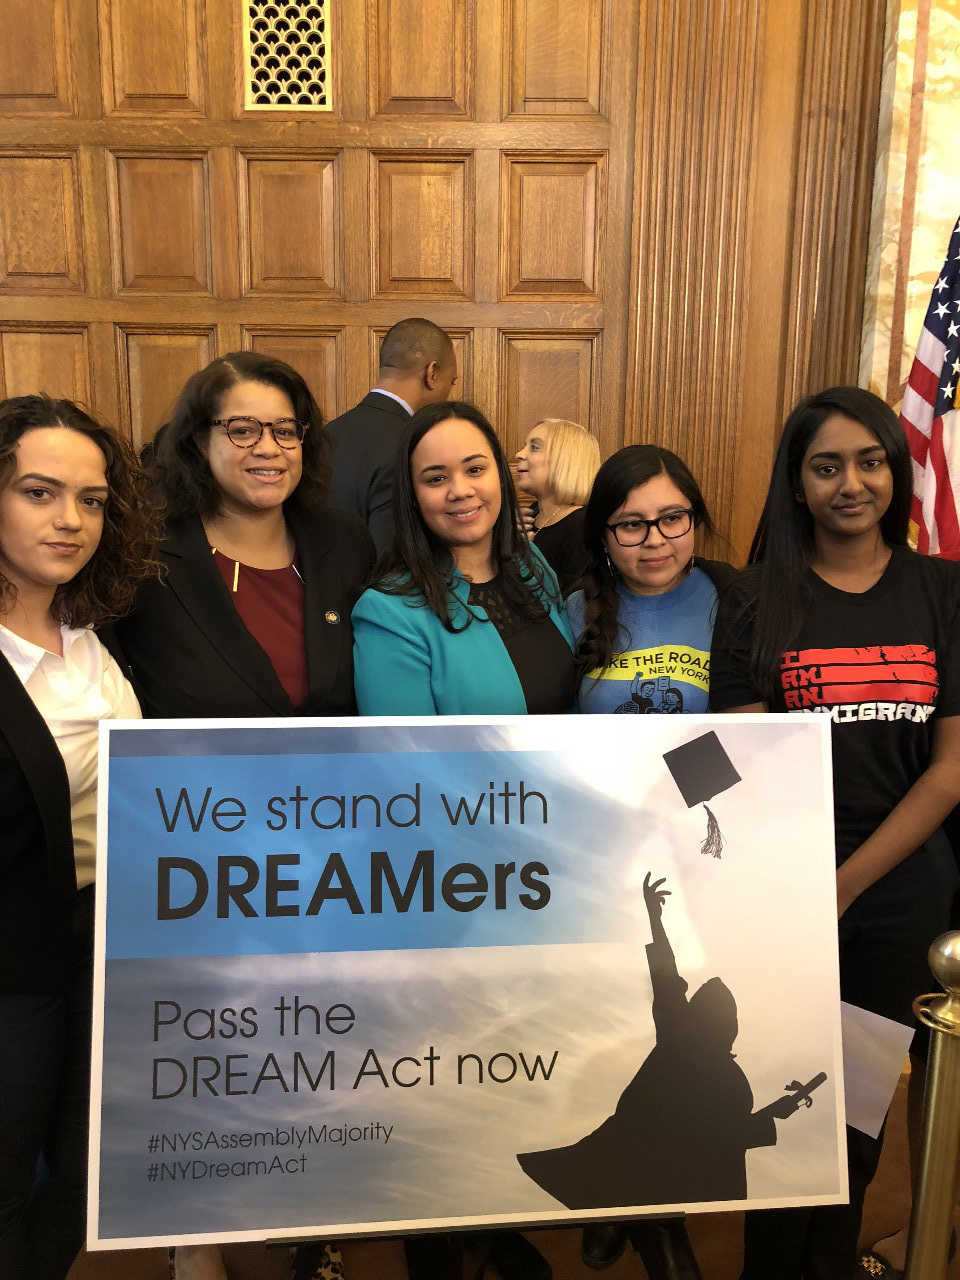 Assemblywoman Solages meets with dreamers in support of the Jose Peralta Dream Act that was signed into law in 2019.